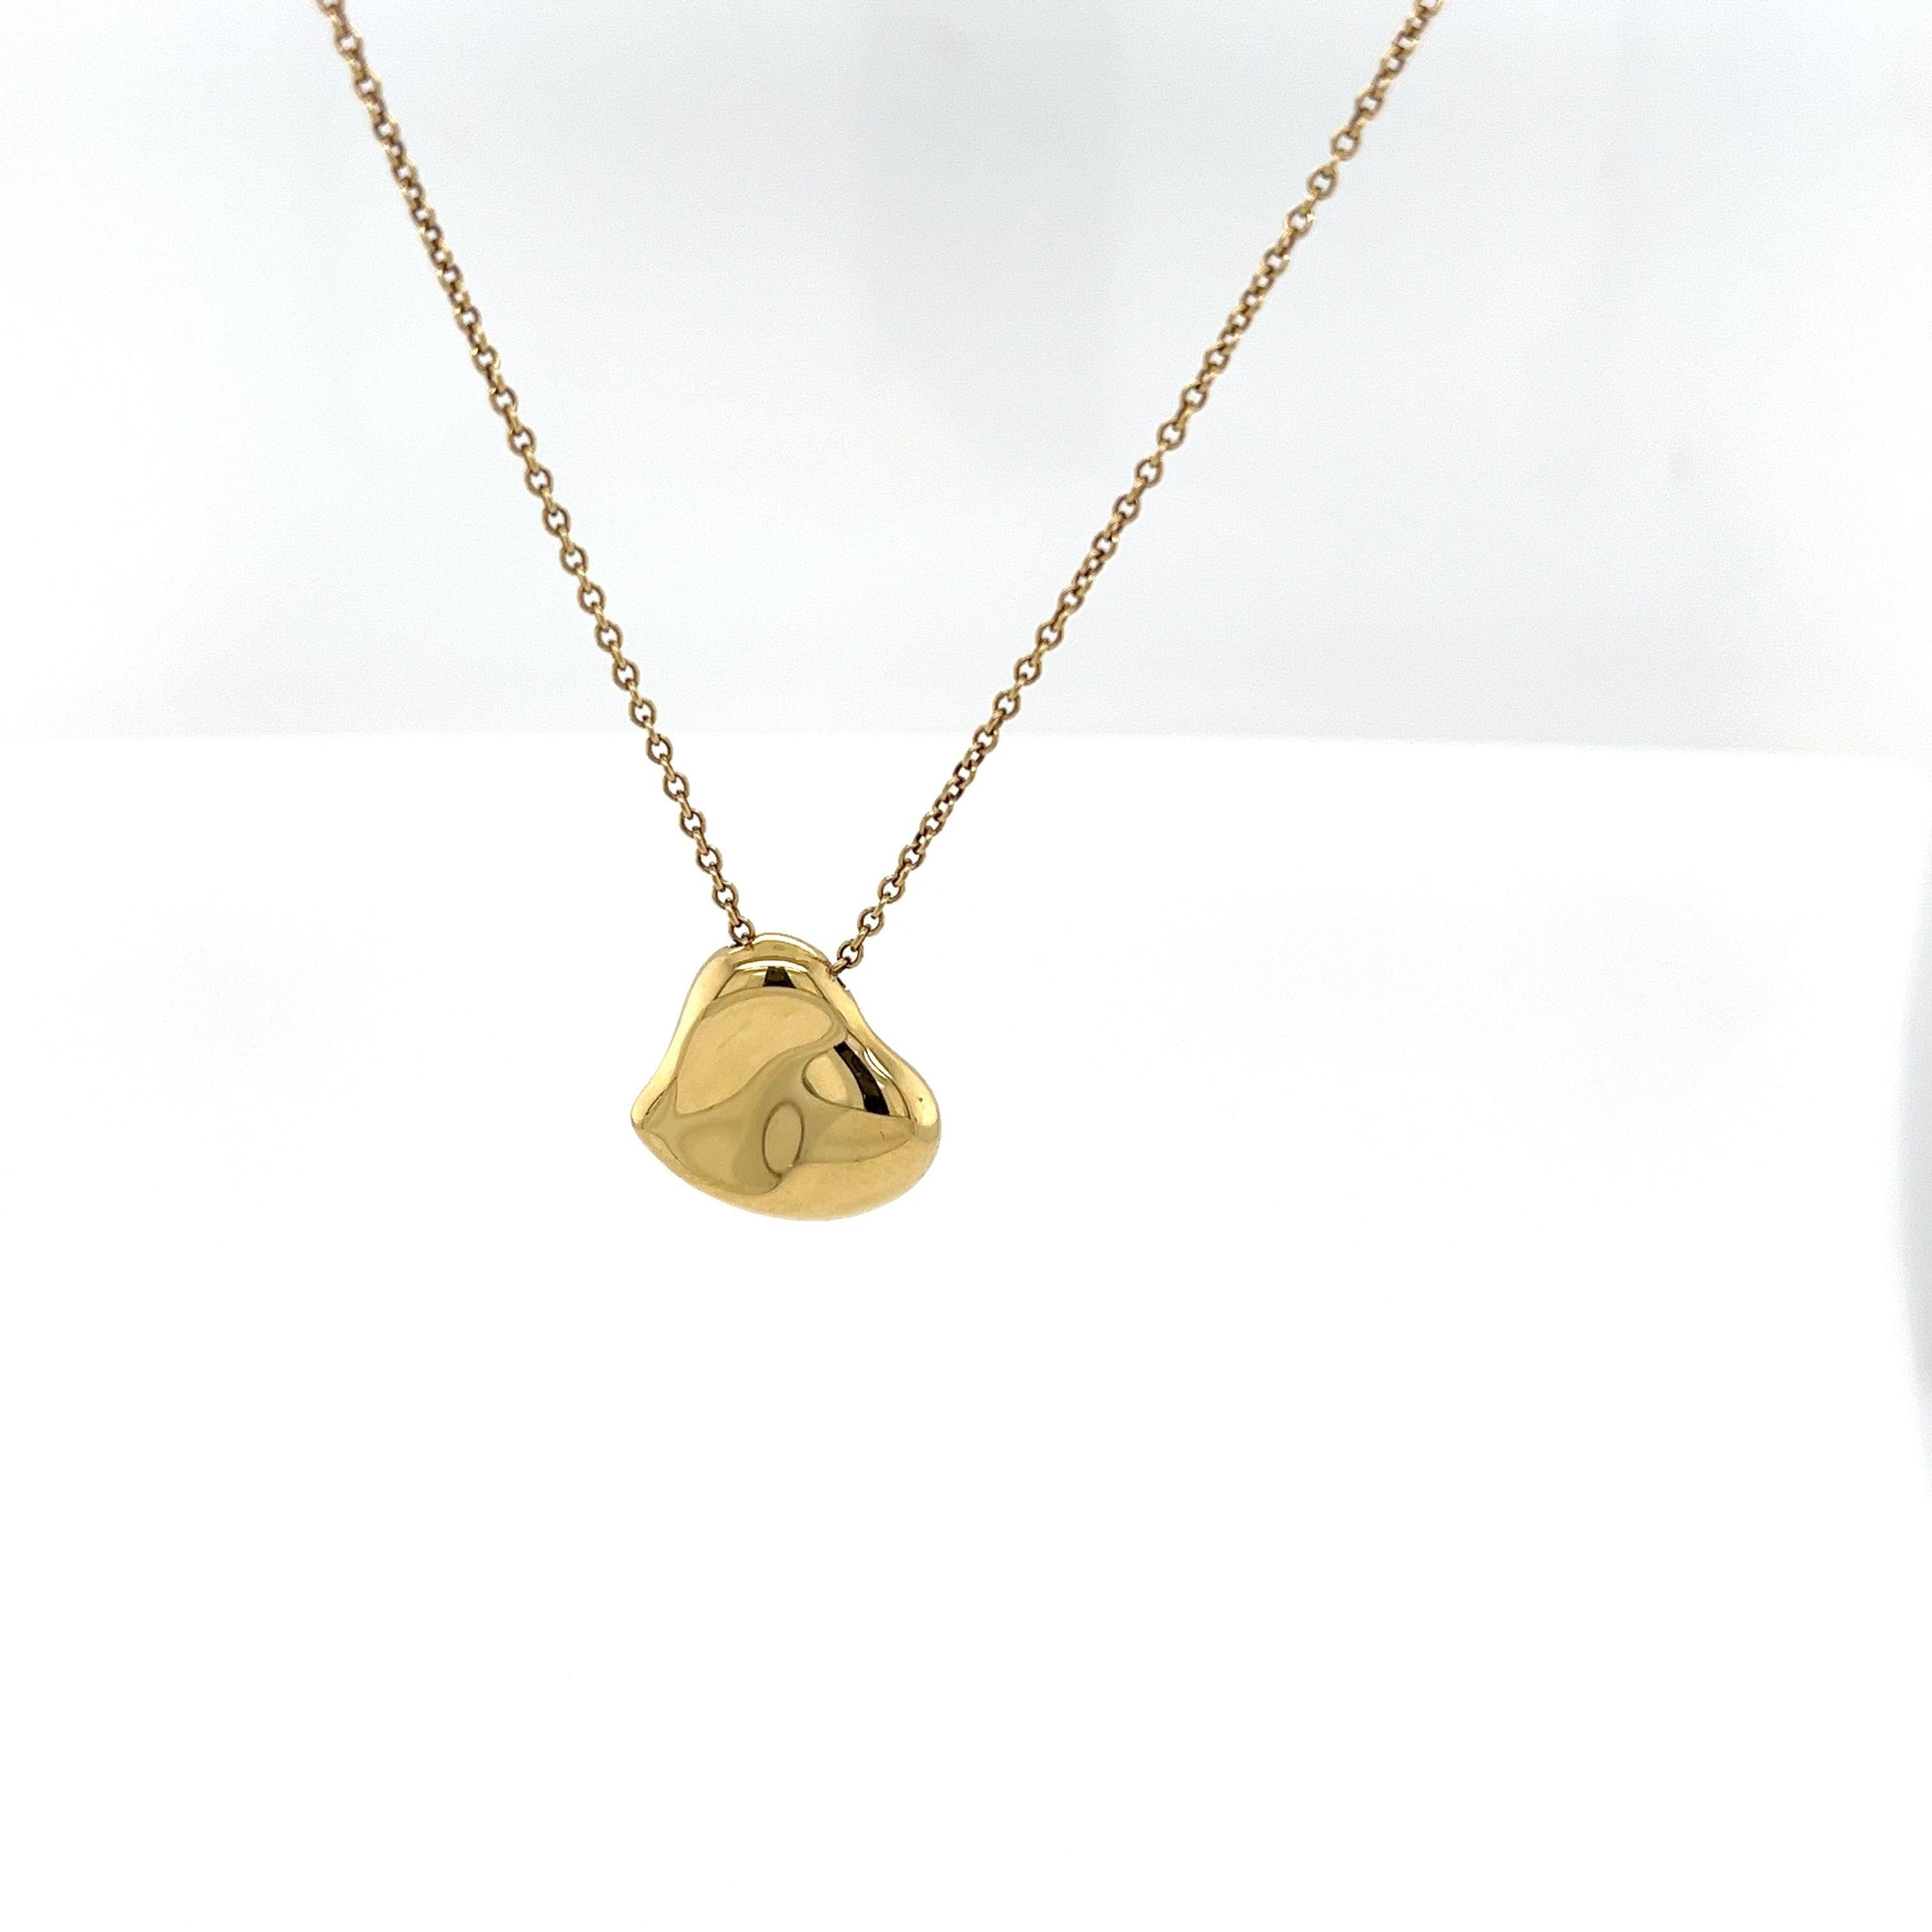 The simple, evocative shape of Elsa Peretti®  Heart designs celebrates the spirit of love. This elegant heart shape pendant is set in 18ct yellow gold suspended from 16